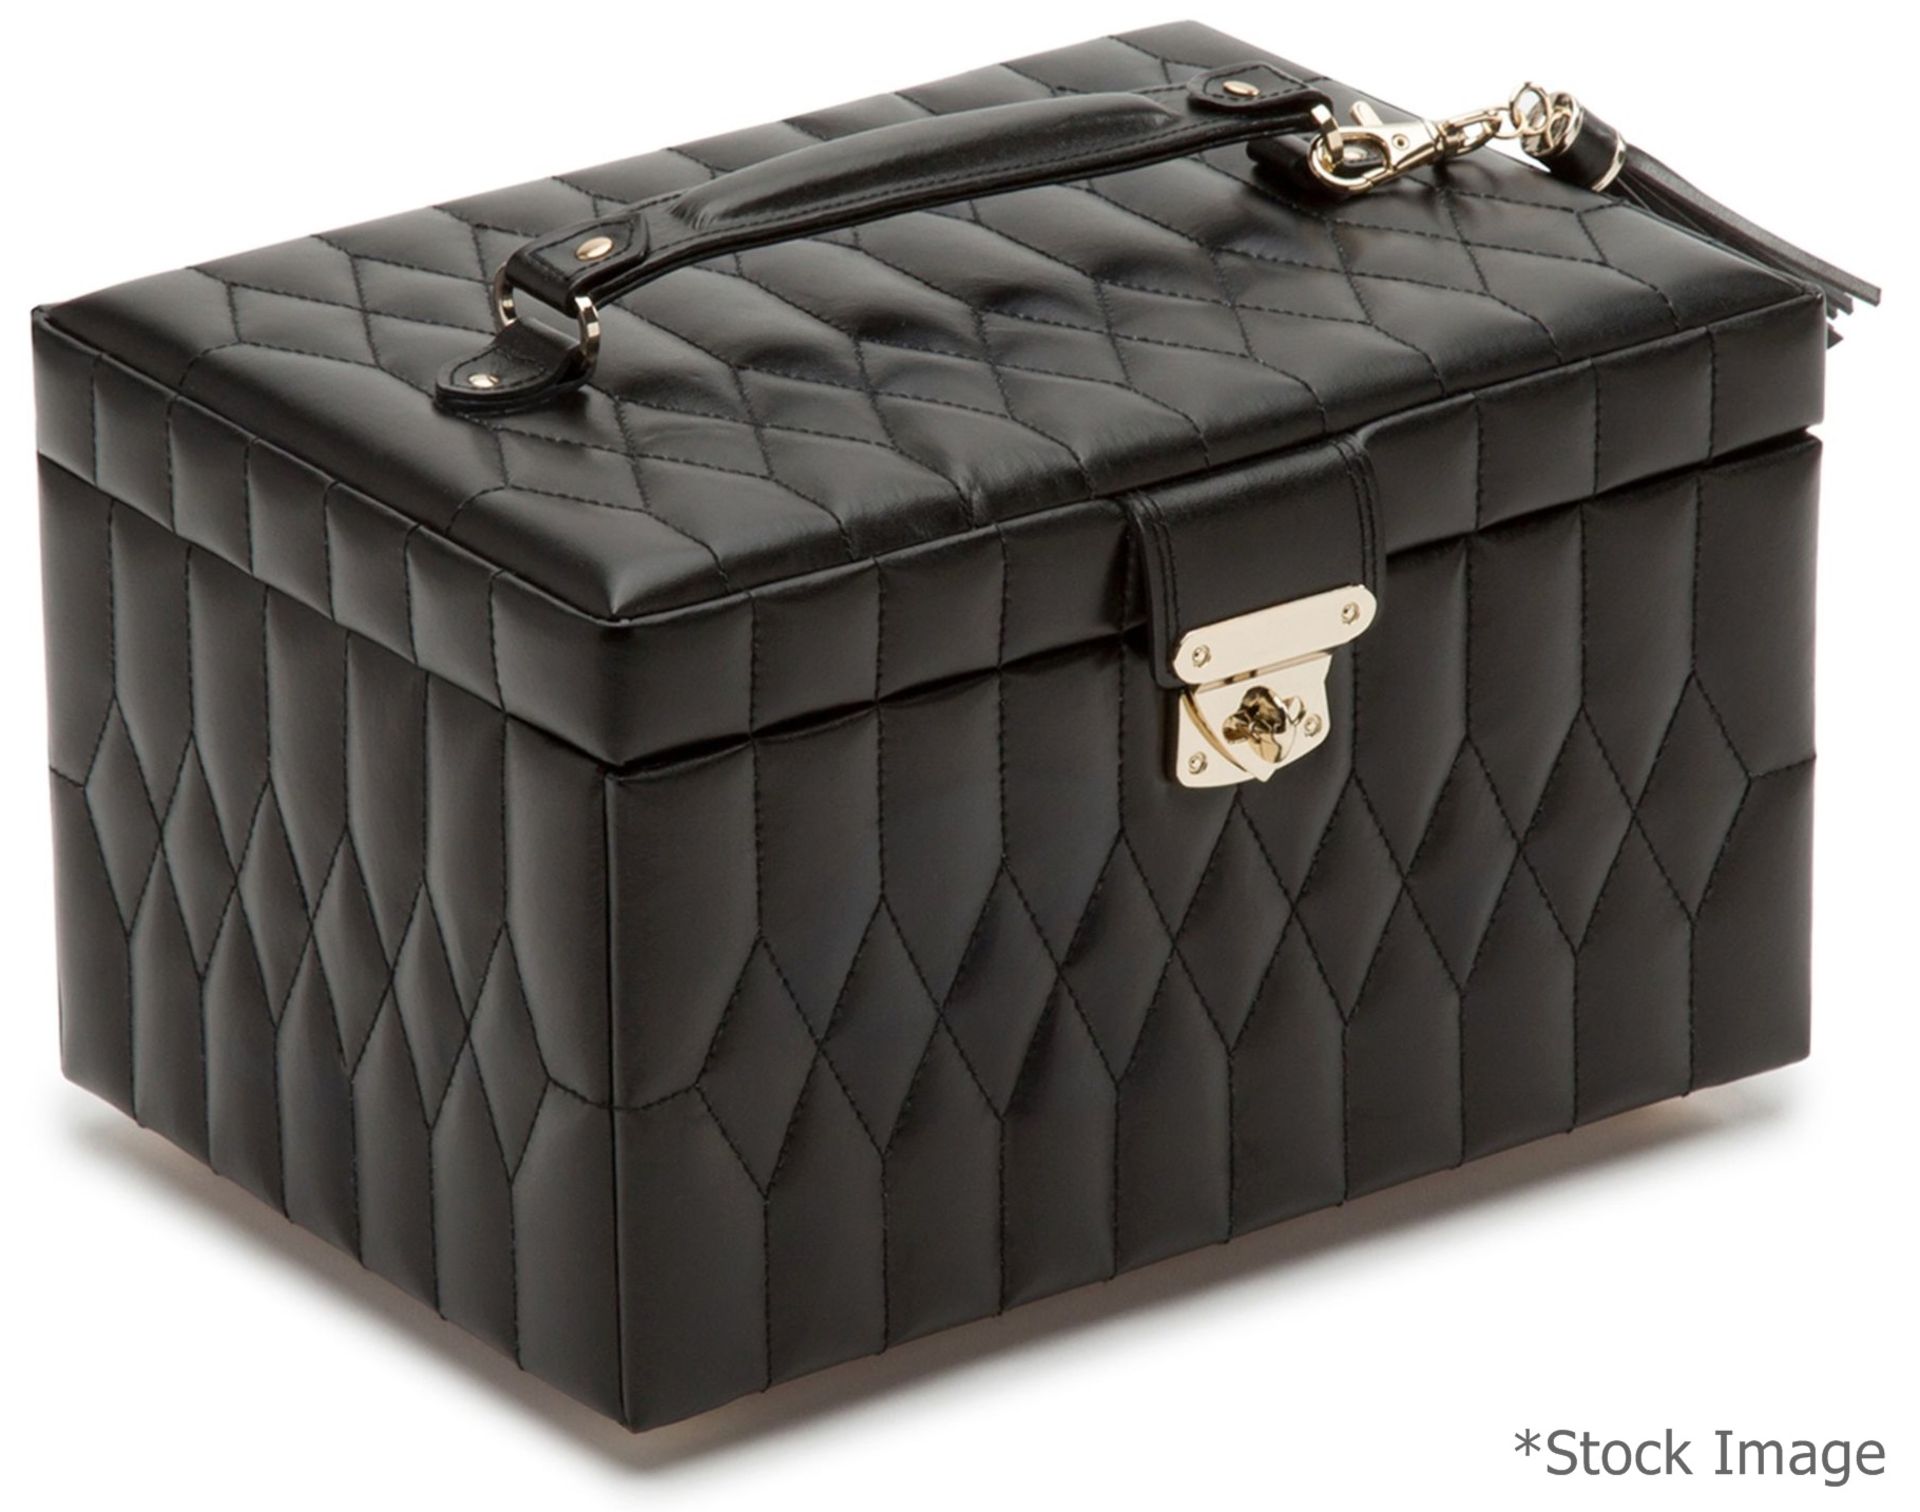 1 x WOLF 'Caroline' Jewellery Box Handcrafted Black Leather, With Travel Case - Original Price £241 - Image 6 of 17